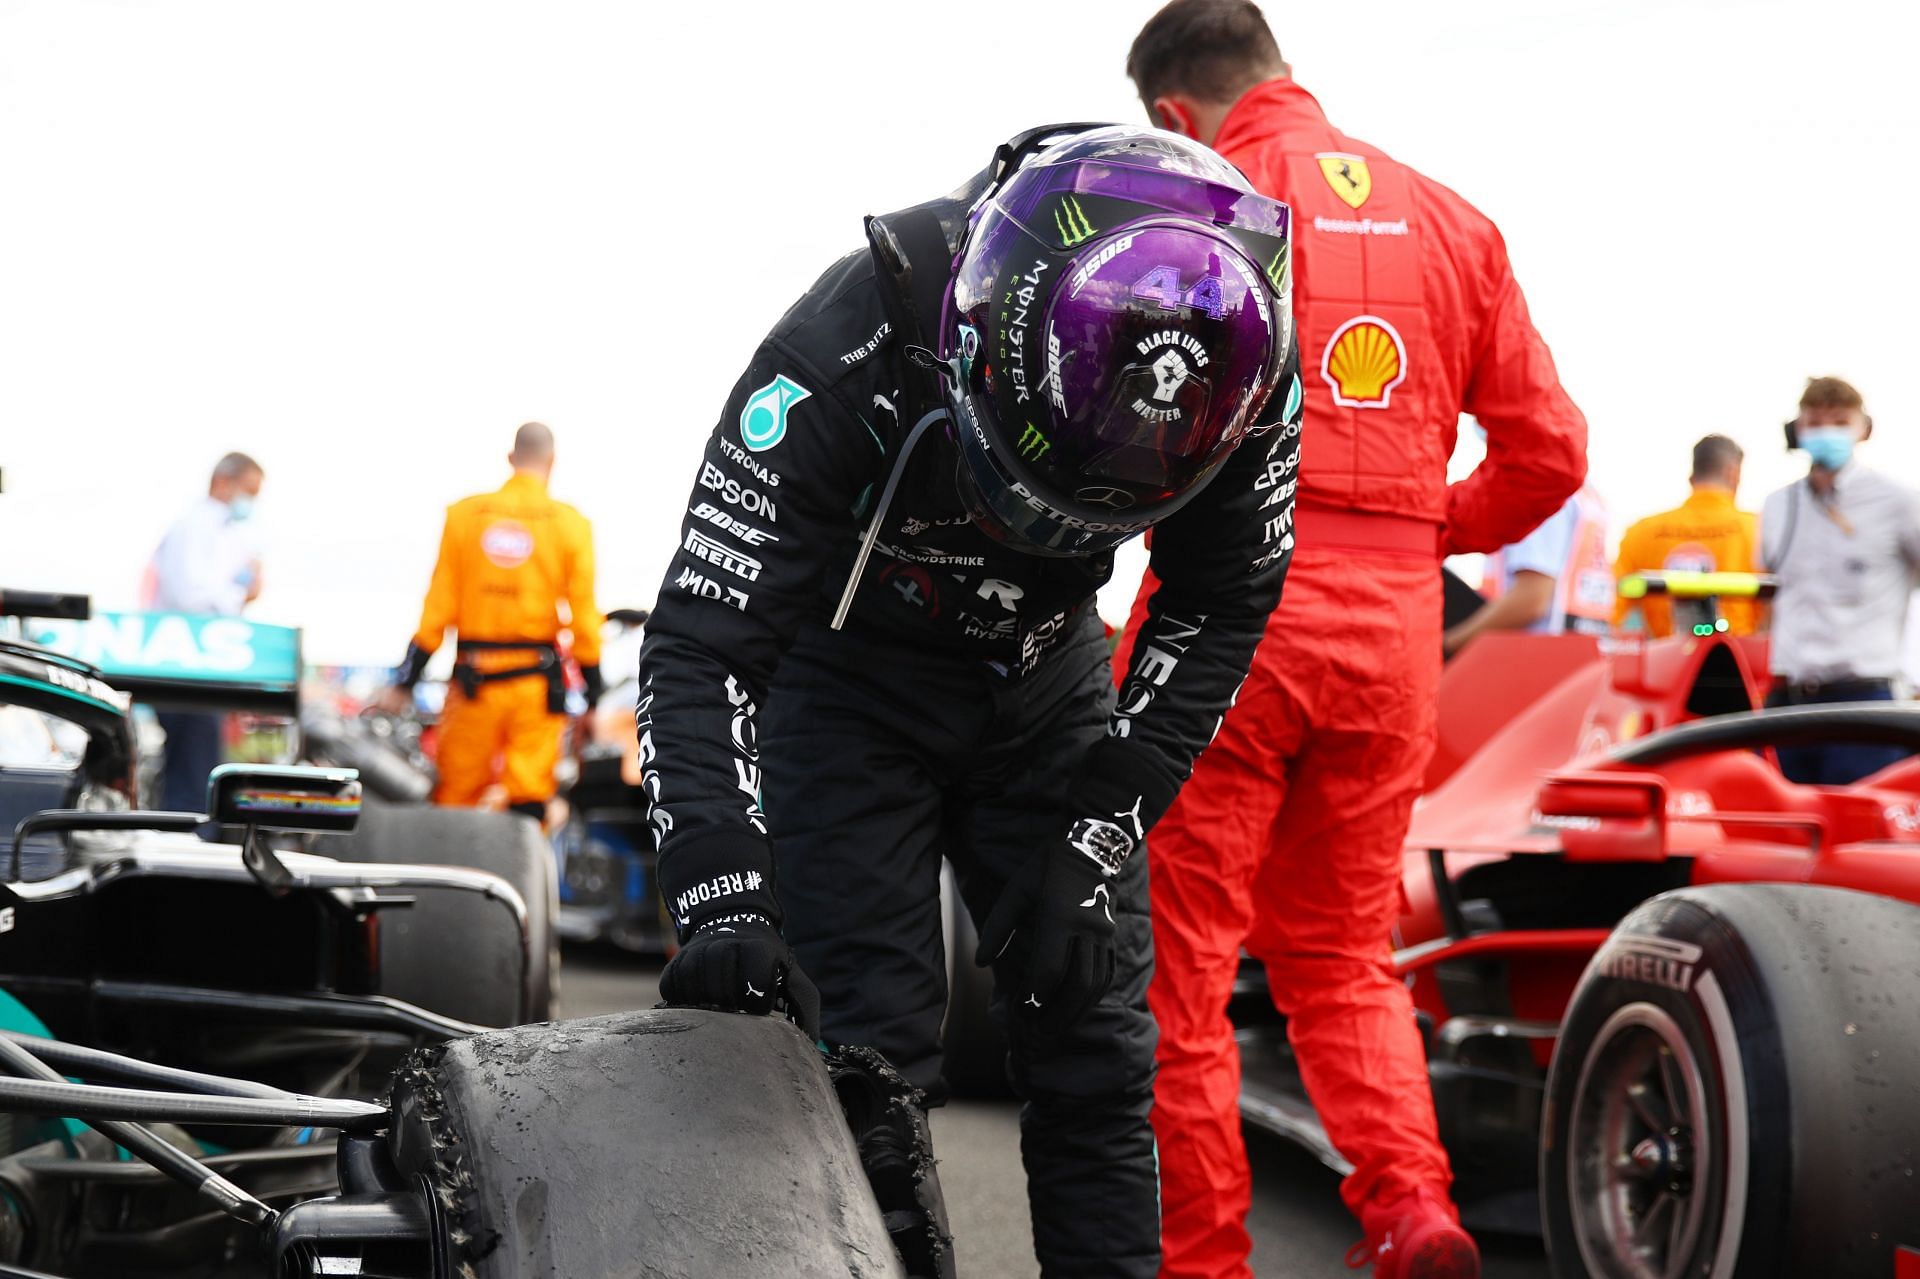 F1 Grand Prix of Great Britain - Lewis Hamilton inspects what remains of his tire